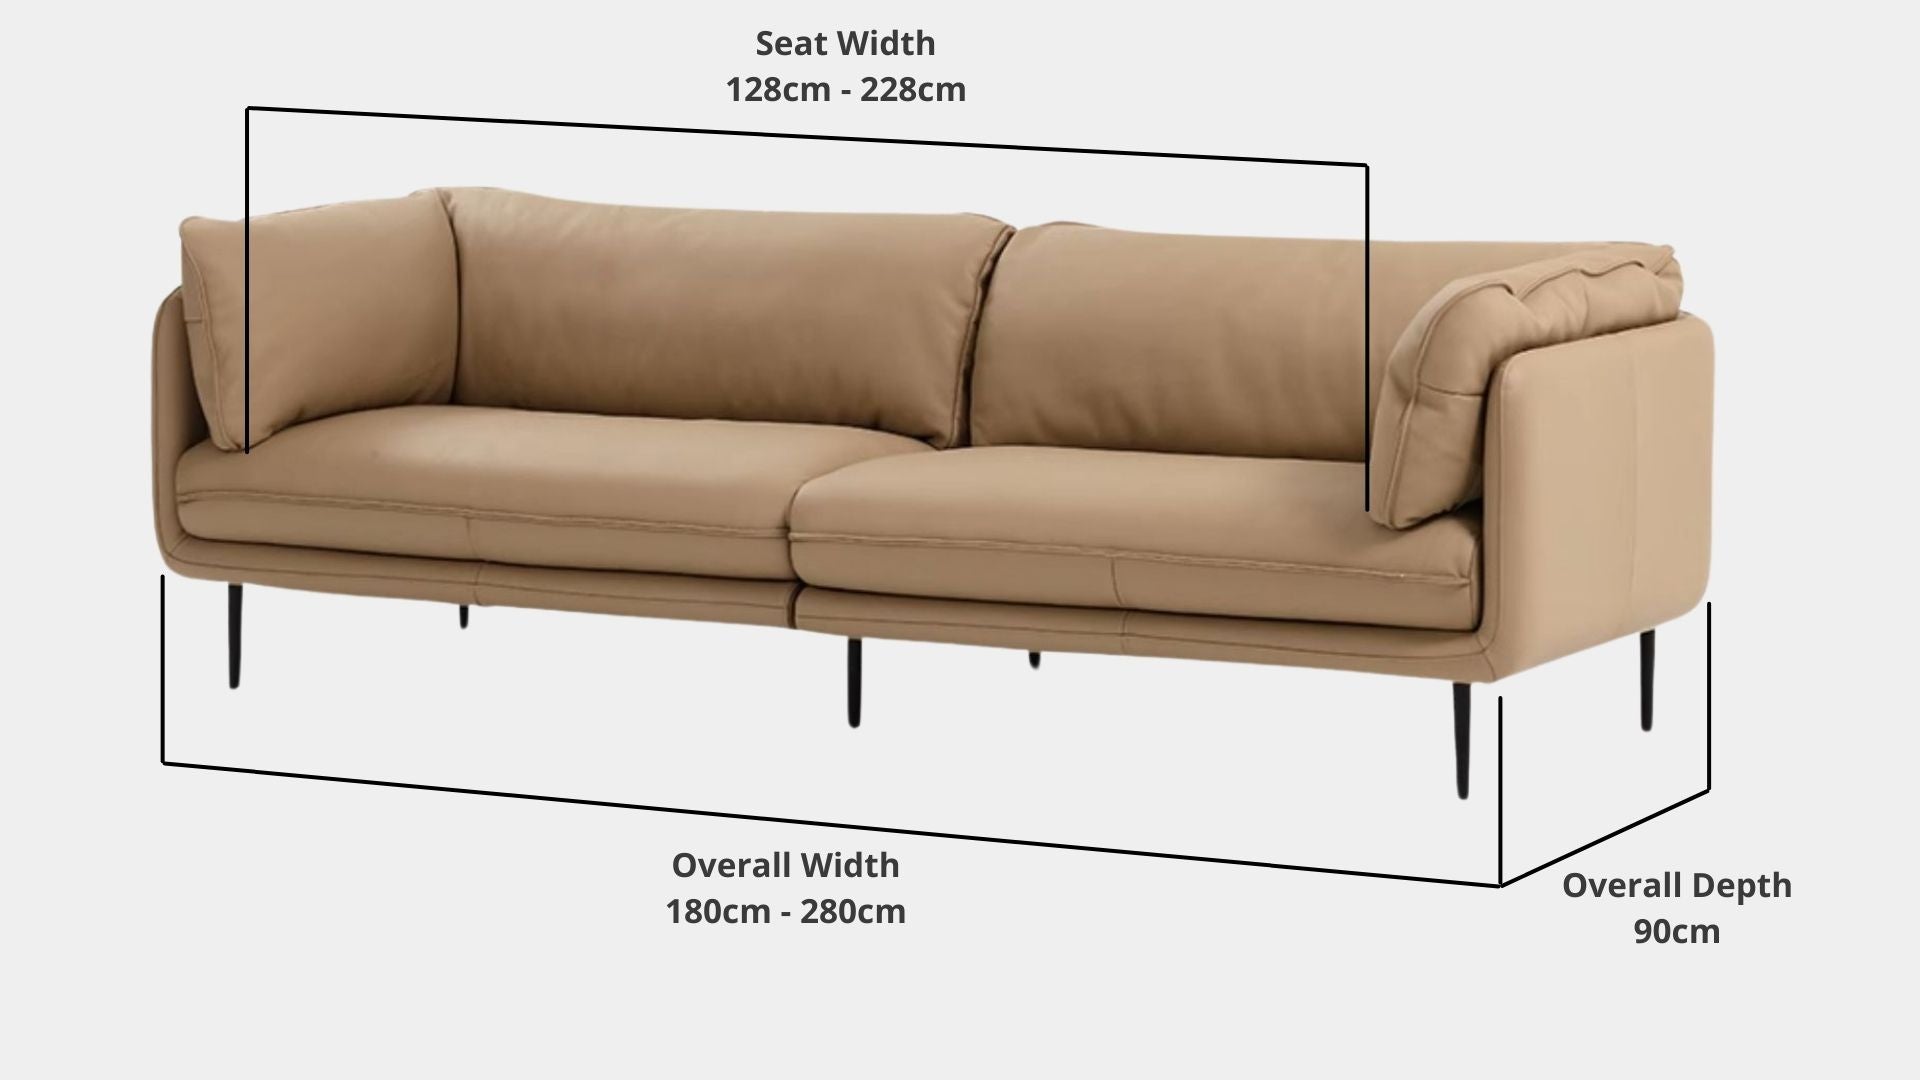 Details the key dimensions in terms of overall width, overall depth and seat width for Cuddle Full Leather Sofa